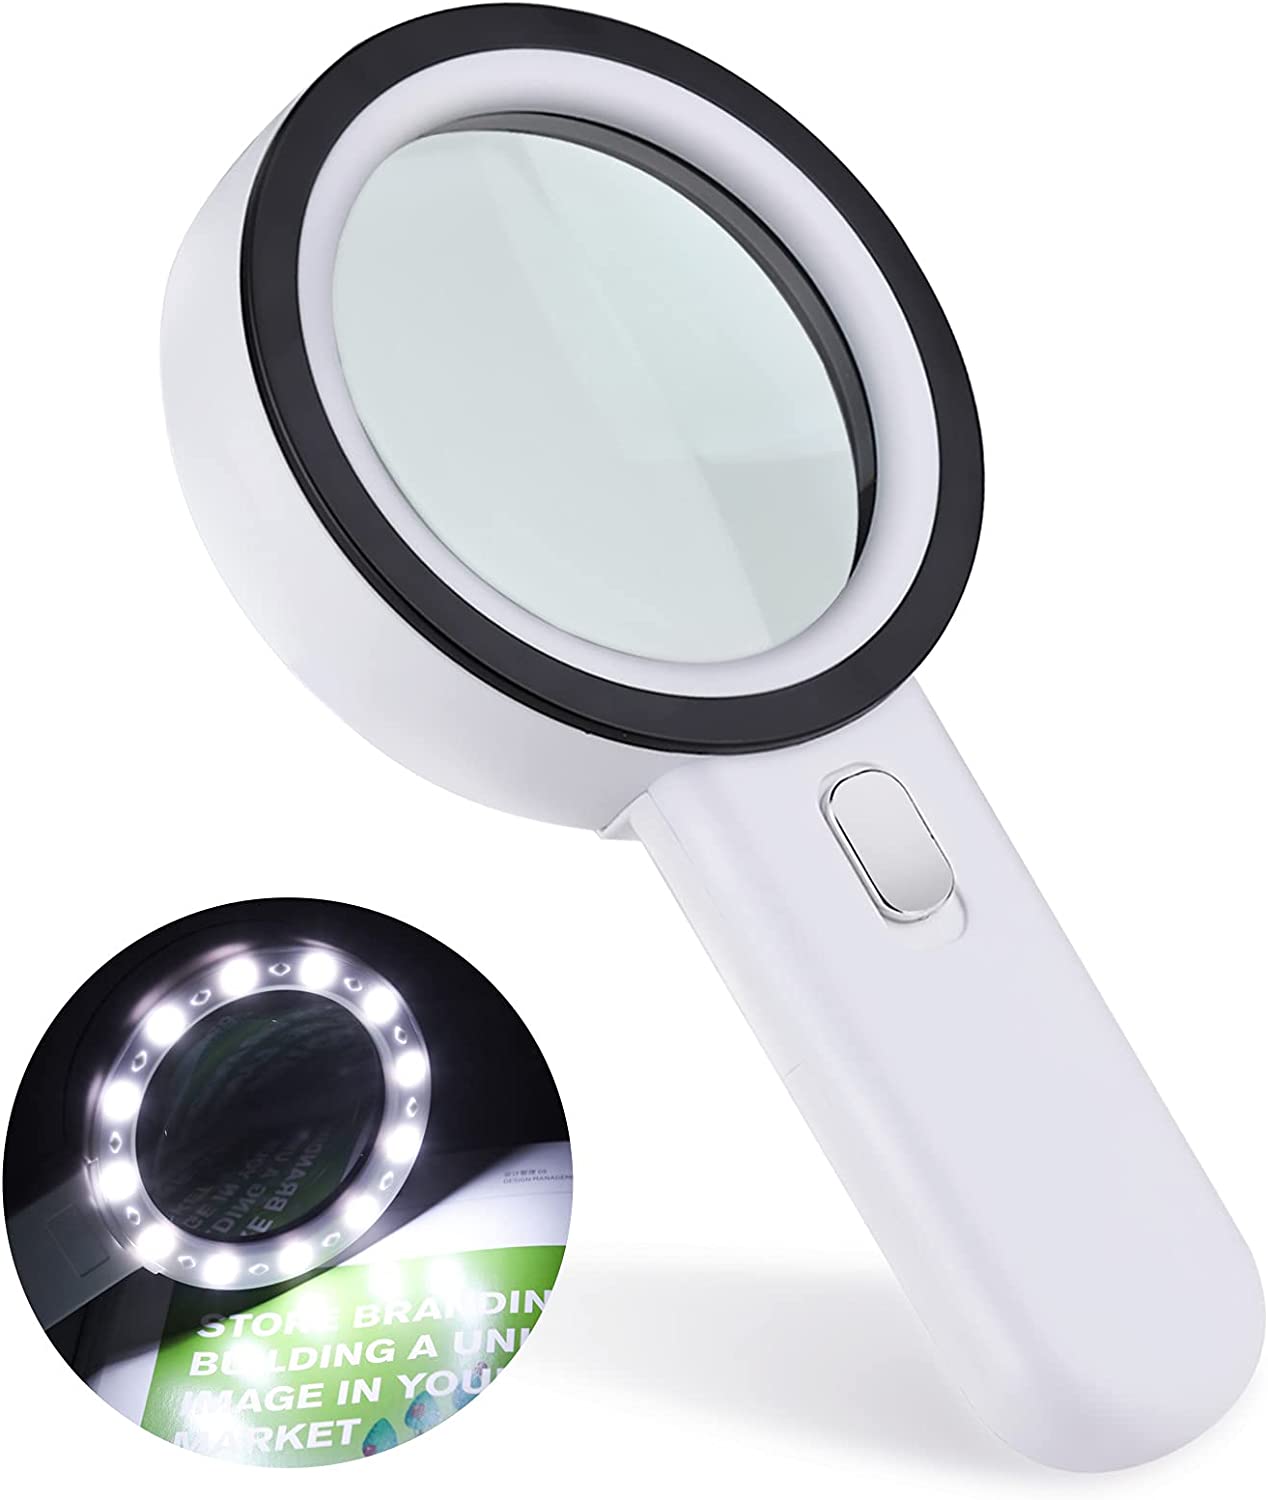 Beigaon Magnifying Glass with Light 3X, 7W LED India